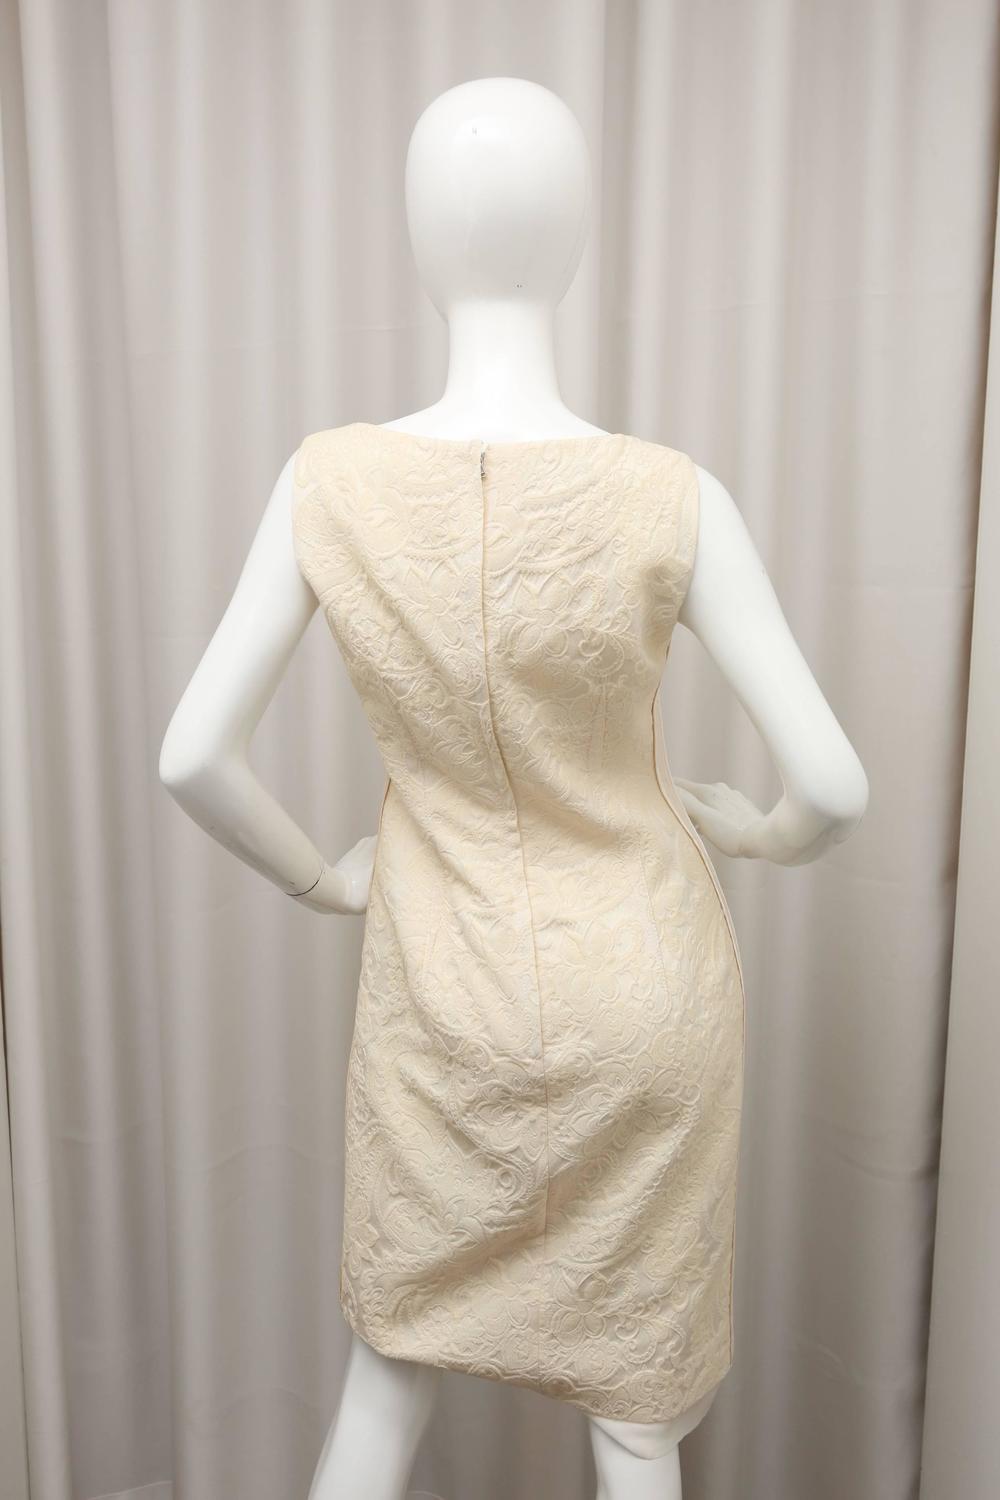 Dolce and Gabbana Ivory 2 Piece Dress Suit For Sale at 1stdibs